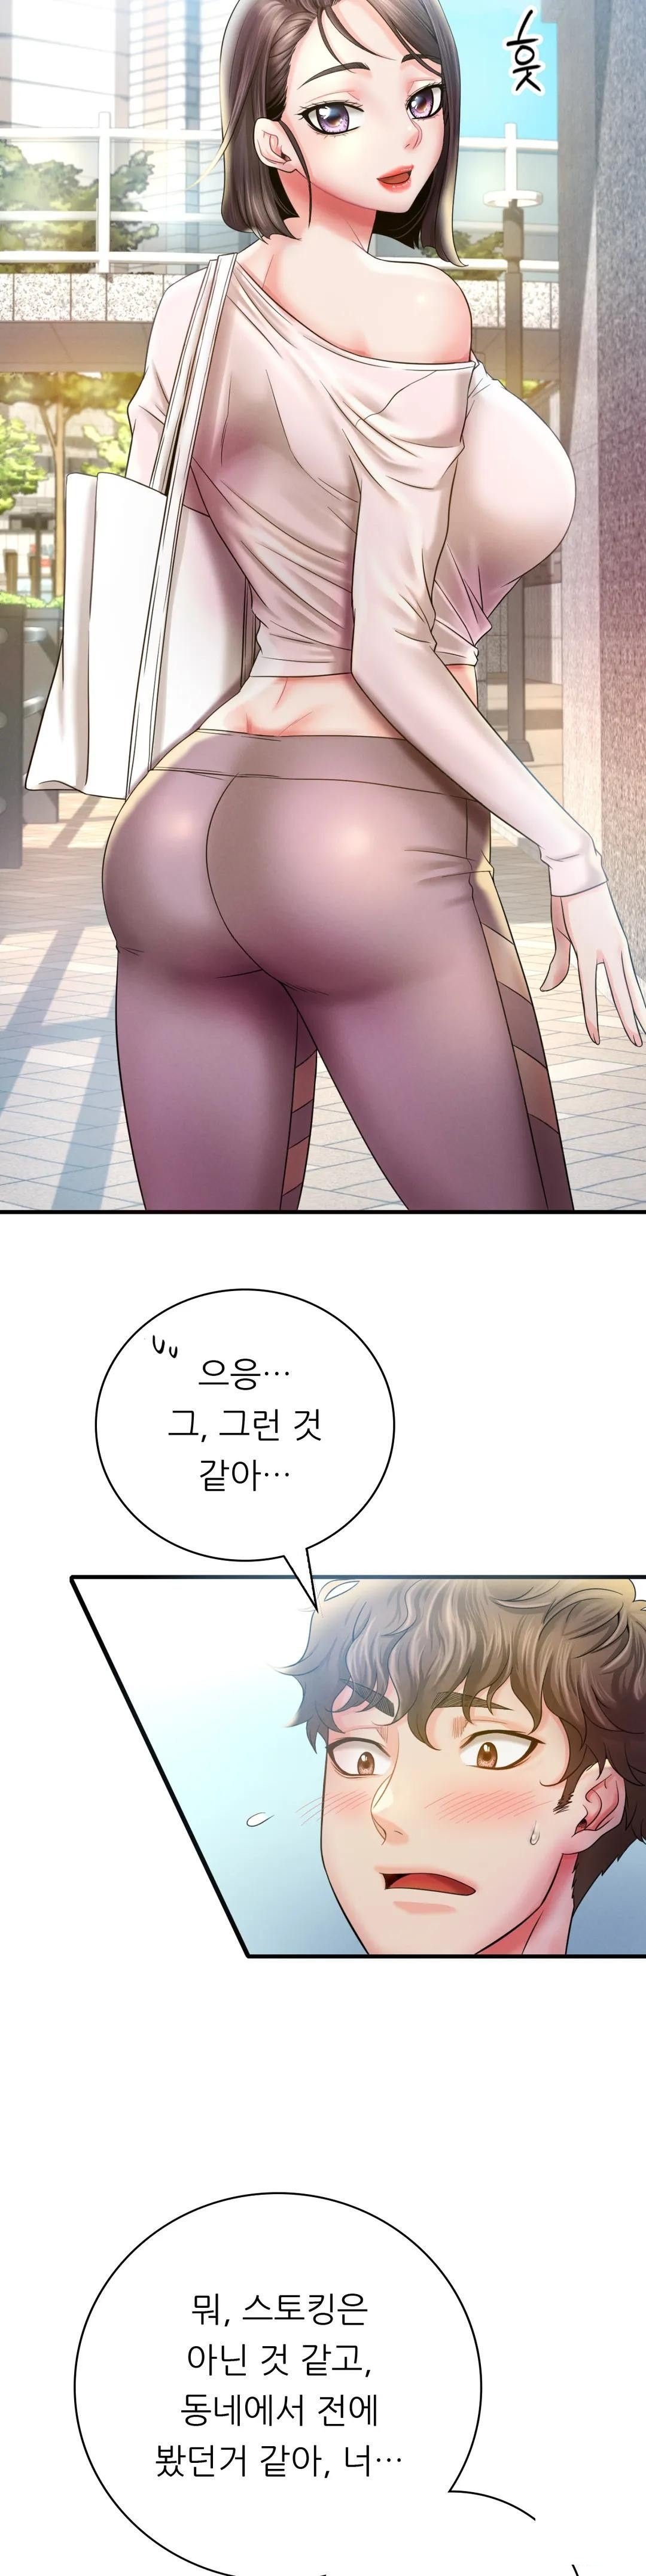 she-wants-to-get-drunk-raw-chap-3-20